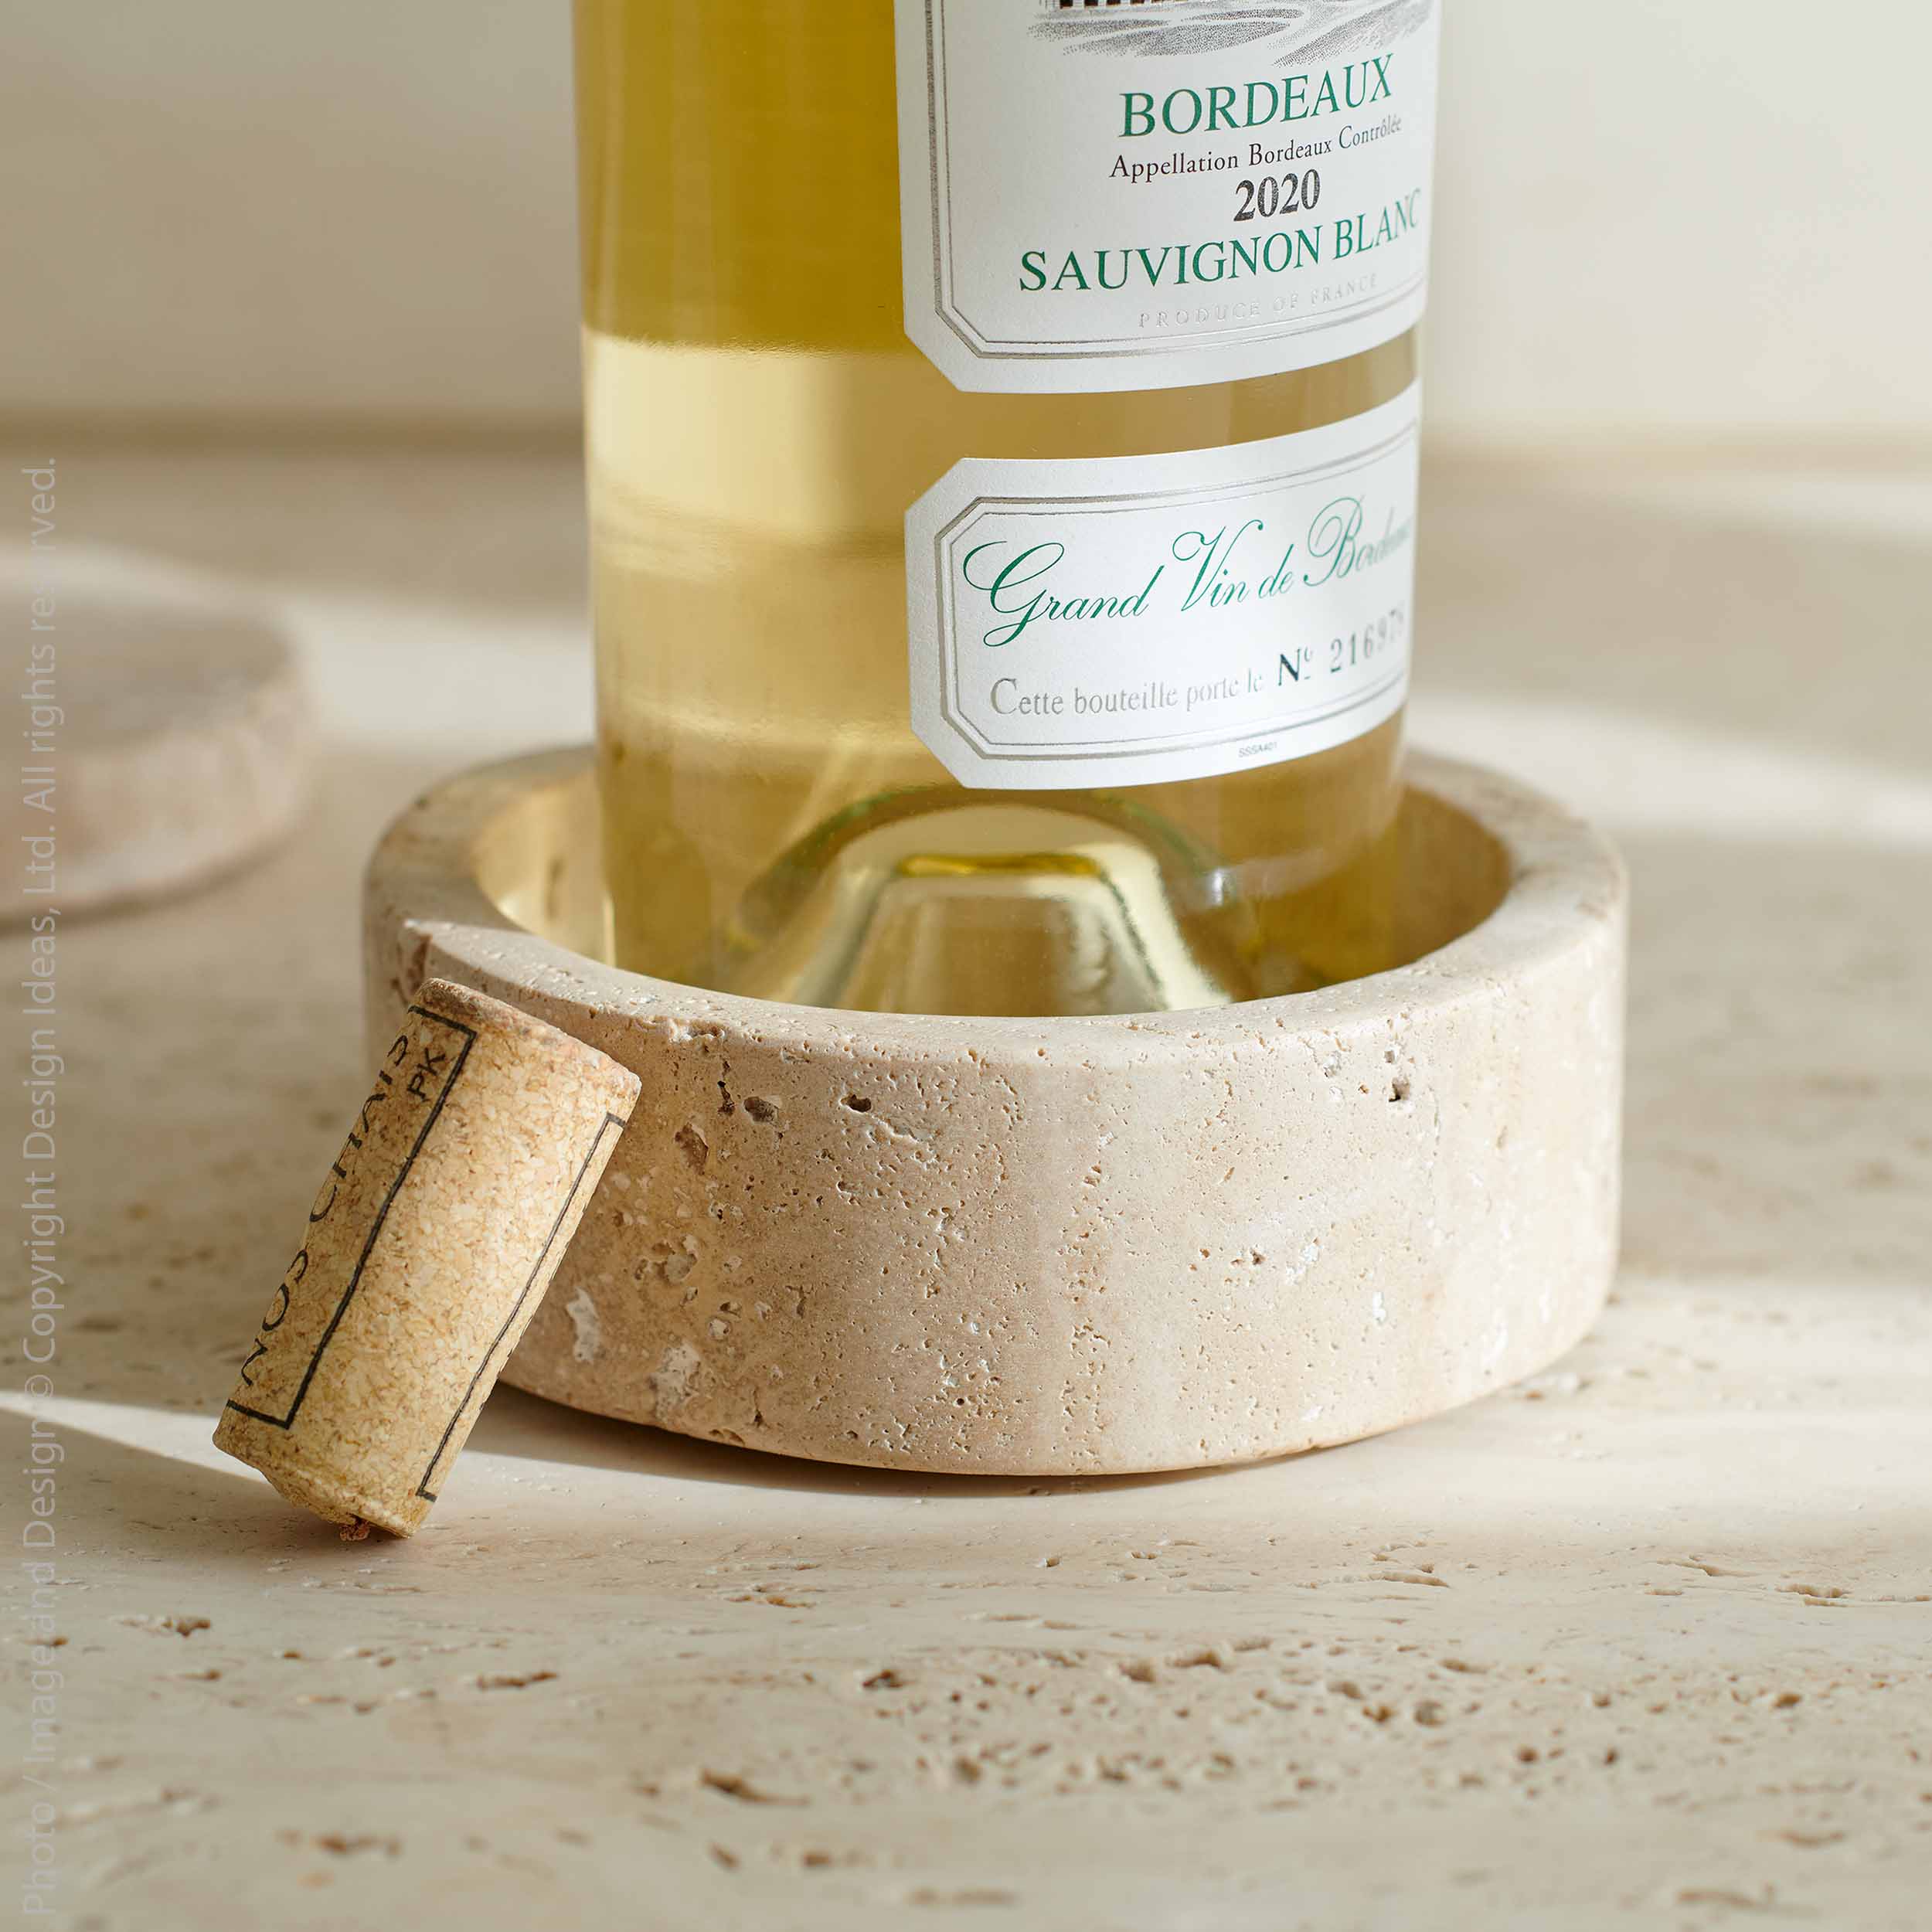 Marbella™ Travertine Wine Bottle Coaster - (colors: Natural) | Premium Coaster from the Marbella™ collection | made with Travertine for long lasting use